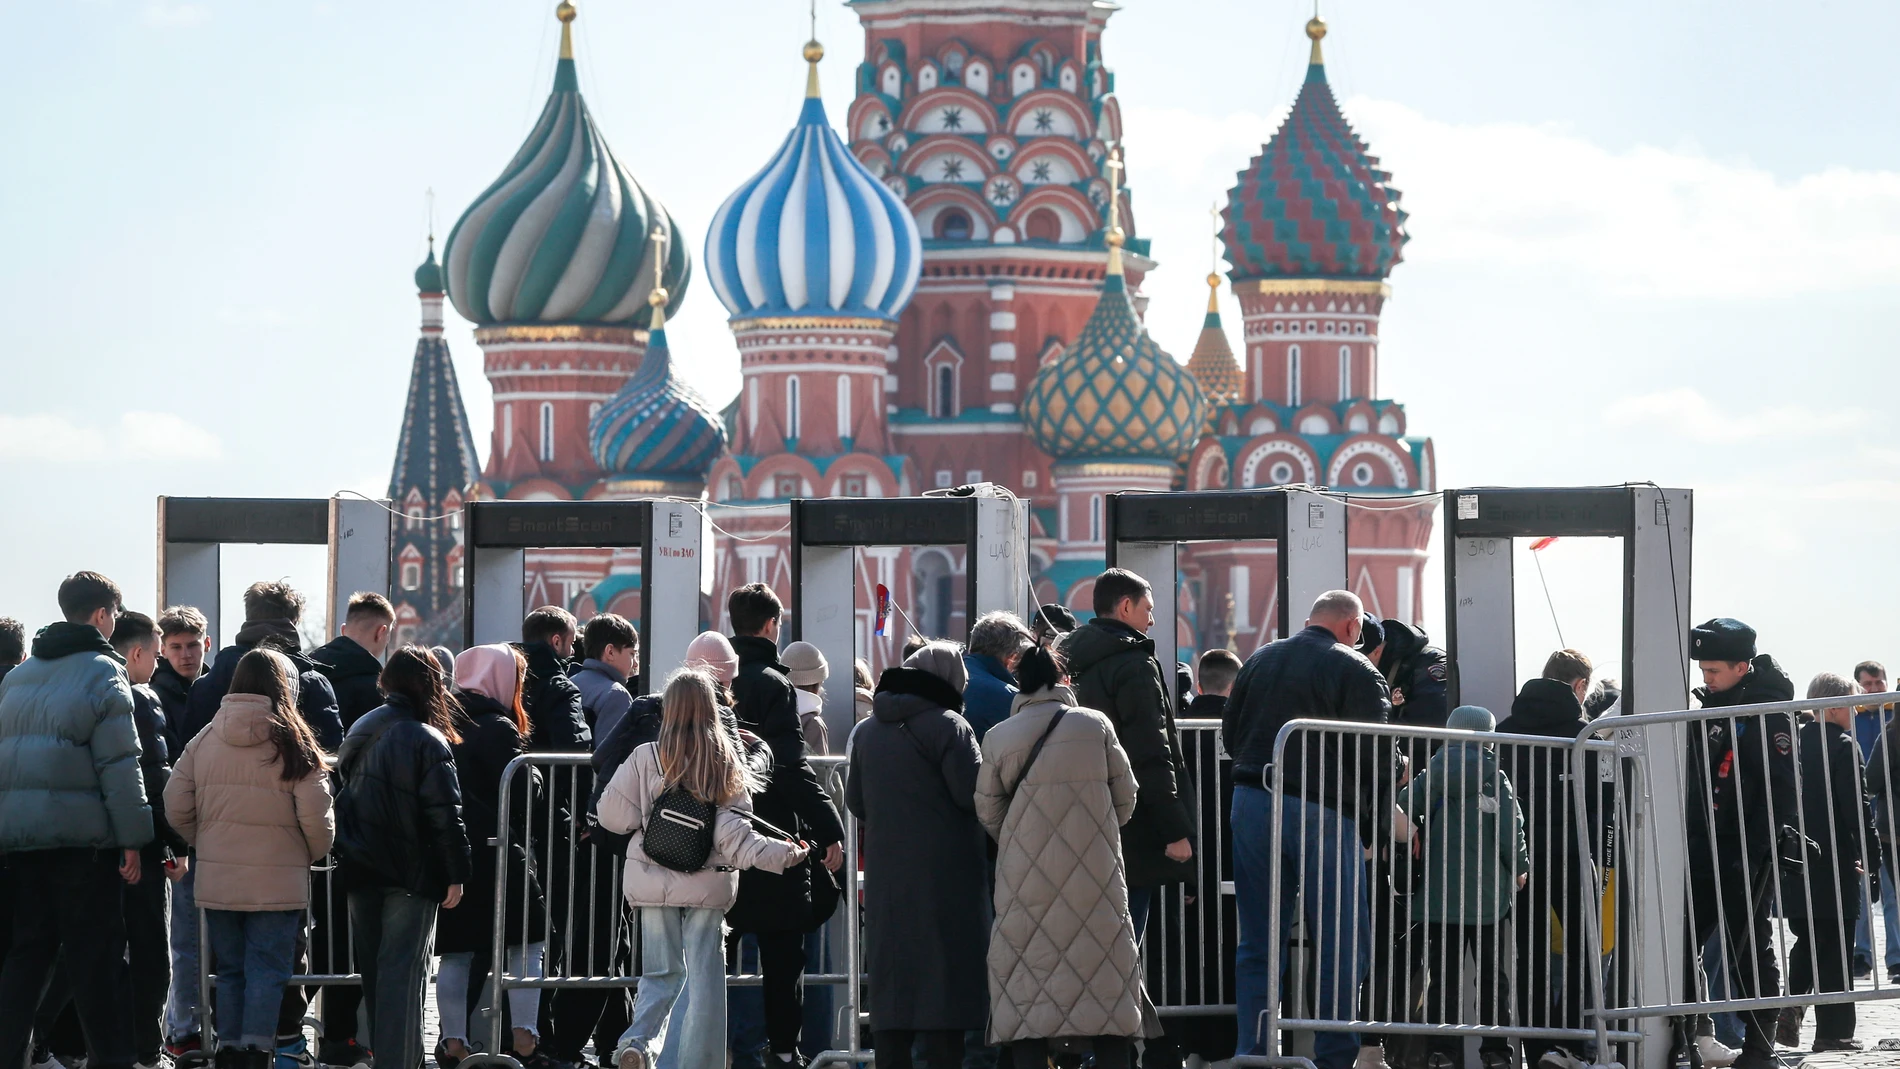 Moscow (Russian Federation), 27/03/2024.- People enter the Red Square through metal detectors amid tighten security measures in the wake of a terrorist attack at the Crocus City Hall concert venue, in Moscow, Russia, 27 March 2024. At least 139 people were killed and more than 180 hospitalized after a group of gunmen attacked the concert hall in the Moscow region on 22 March evening, Russian officials said. Eleven suspects, including all four gunmen directly involved in the terrorist attack, ...